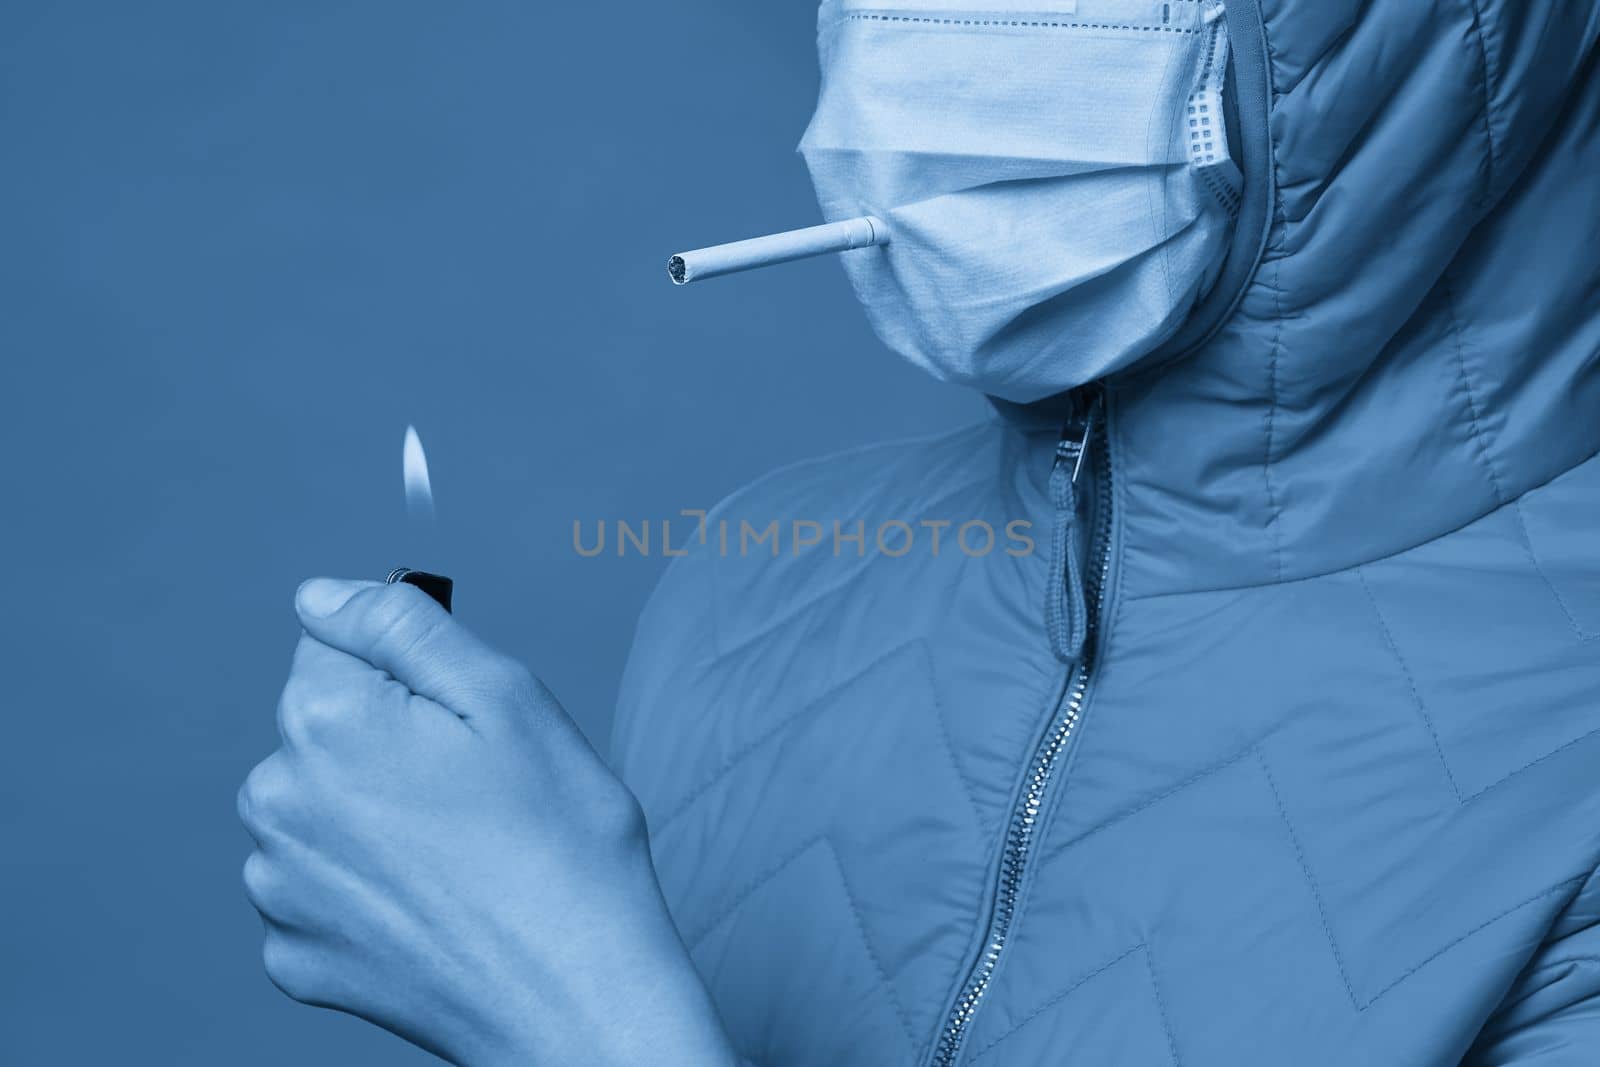 Young girl wearing medical protective mask lights up, holding a cigarette in her mouth through the mask by Mariakray